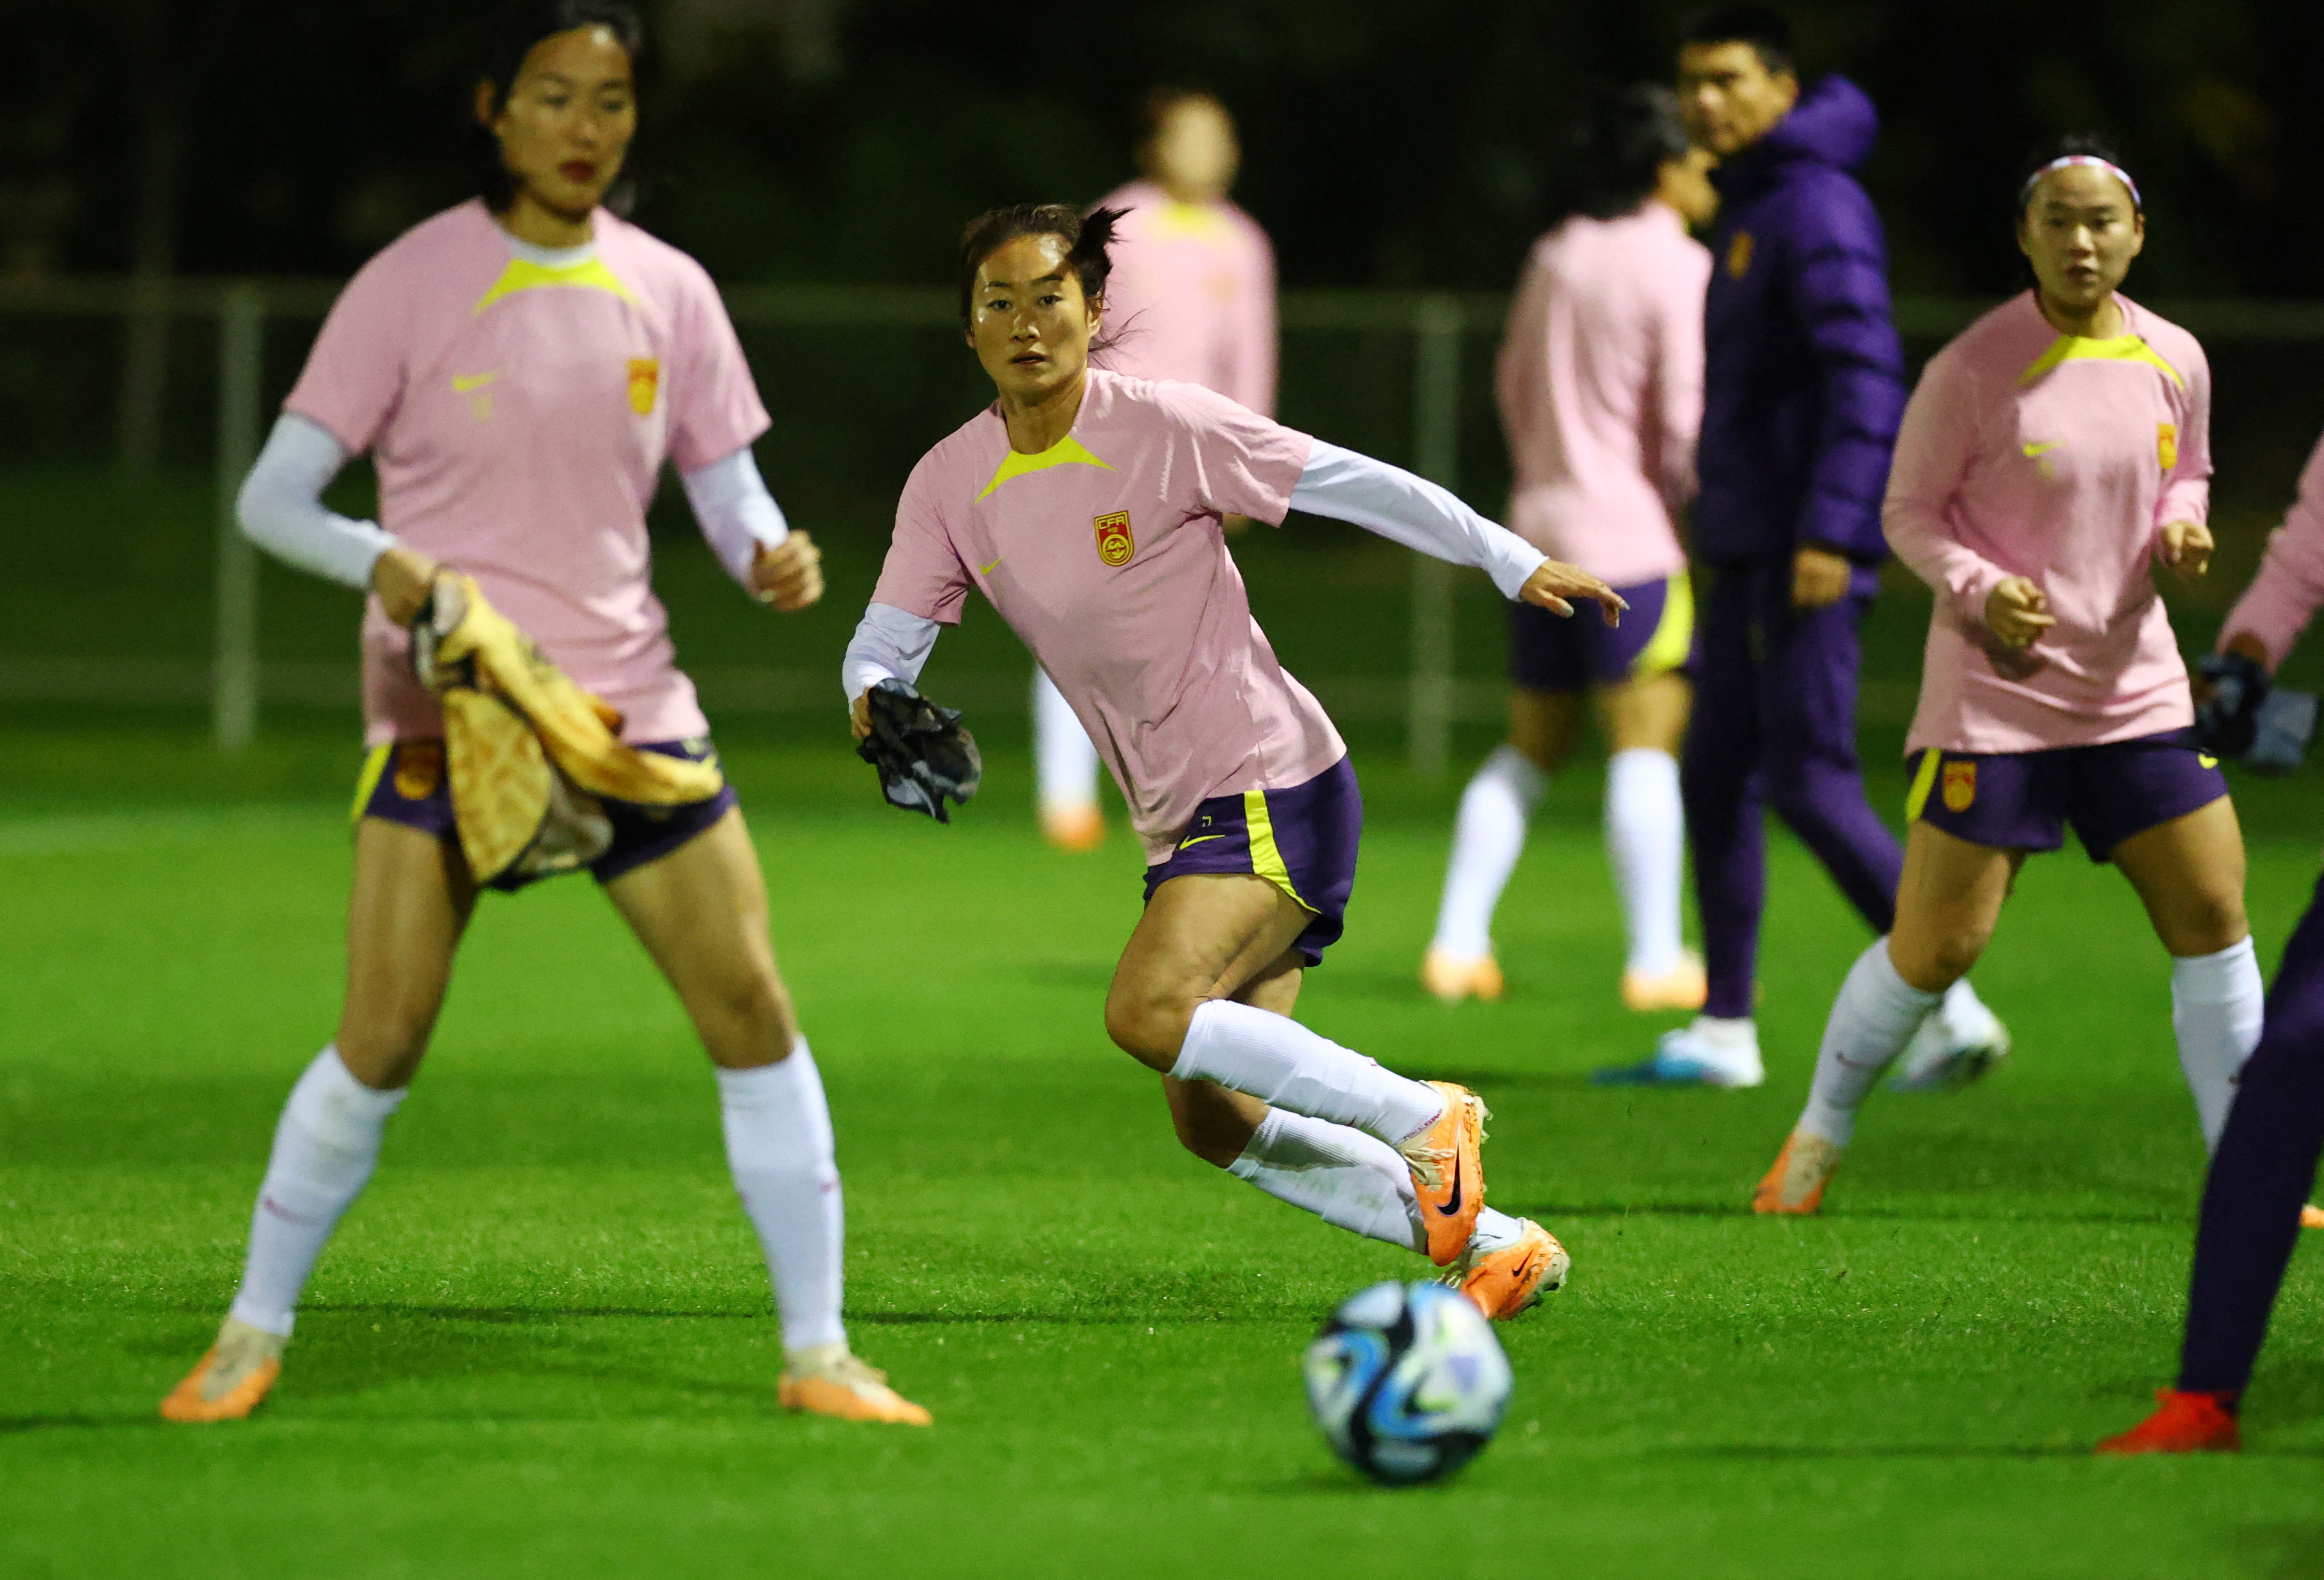 Amateur womens game takes baby steps in China during World Cup Reuters pic